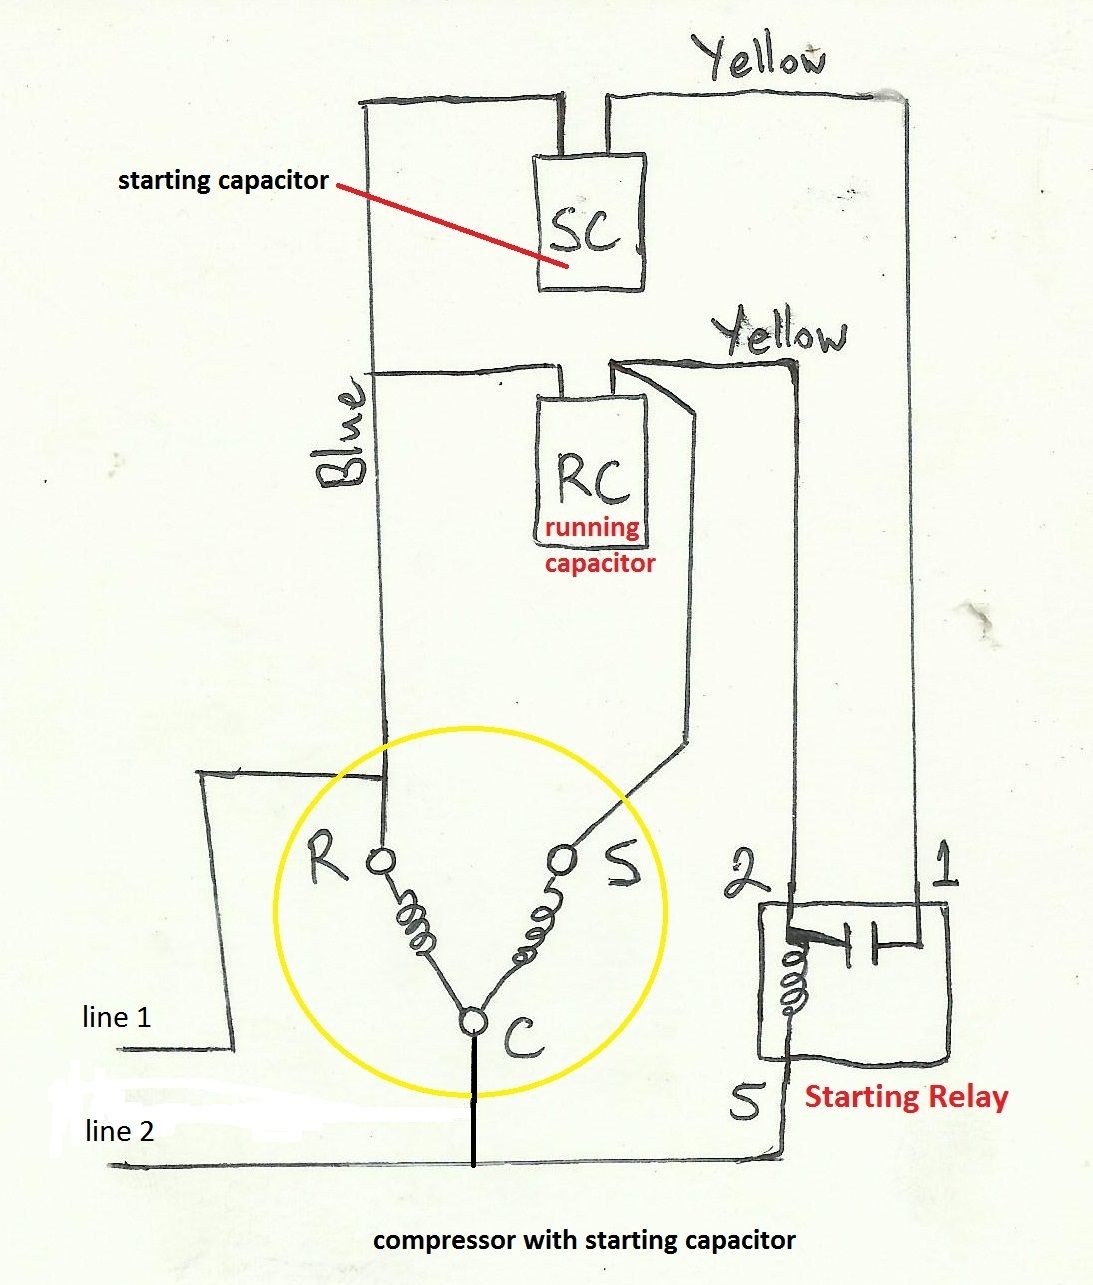 Air pressor Capacitor Wiring Diagram Before you call a AC repair man visit my blog for some tips on how to save thousands in ac repairs